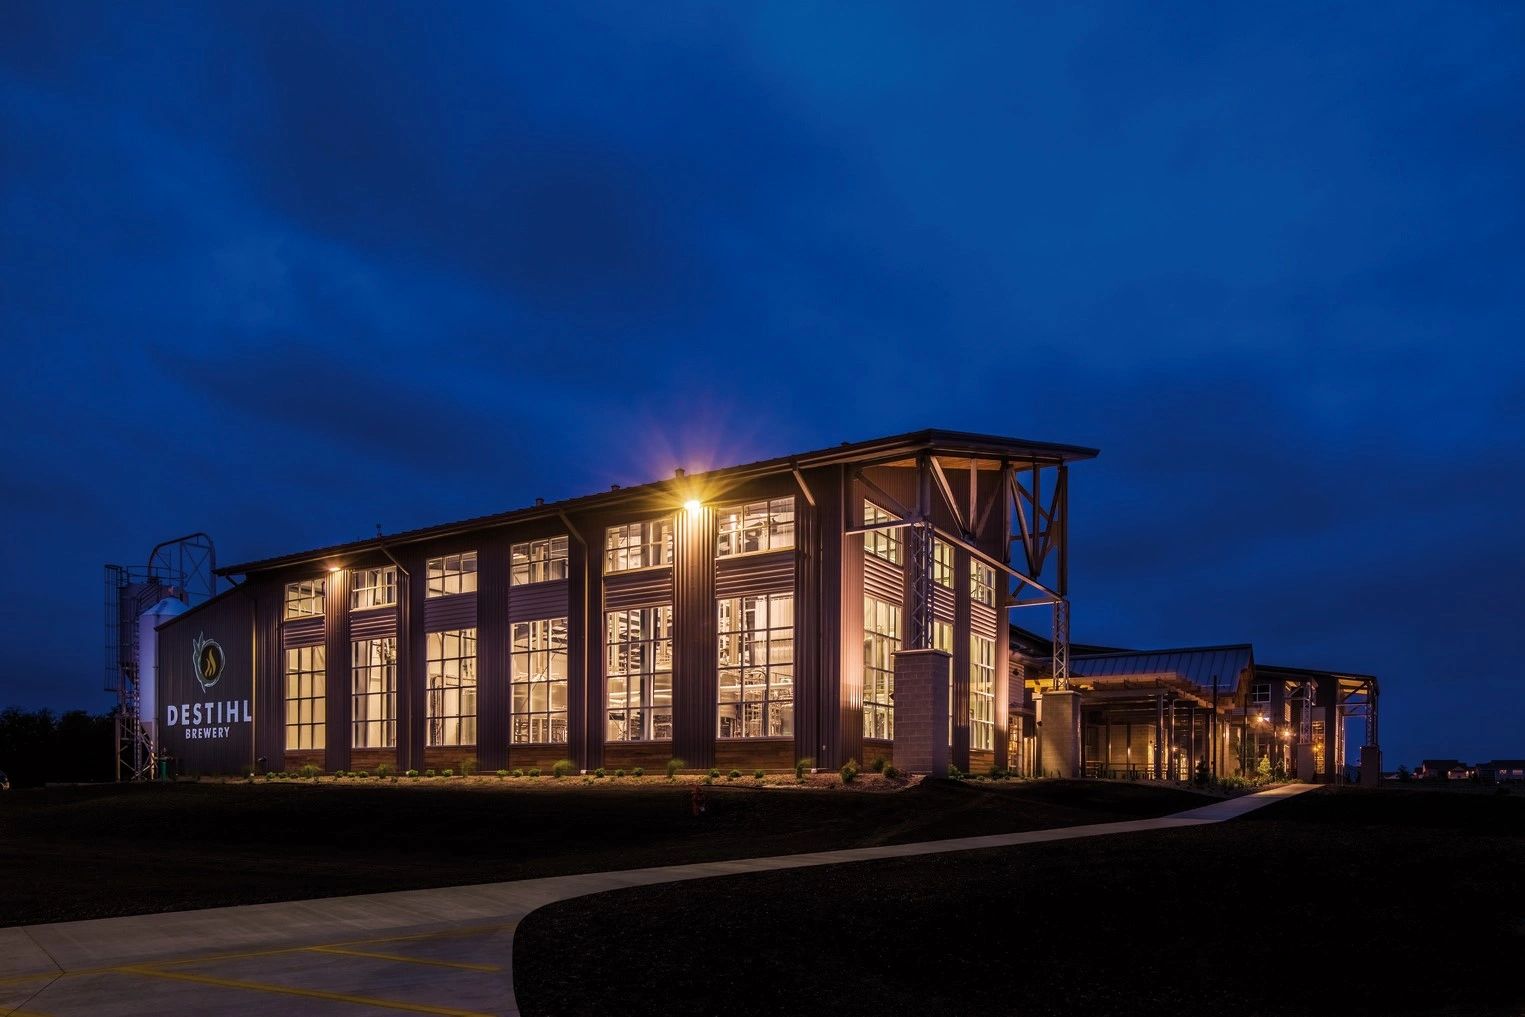 An exterior image of DESTIHL Brewery and Beer Hall at dusk.